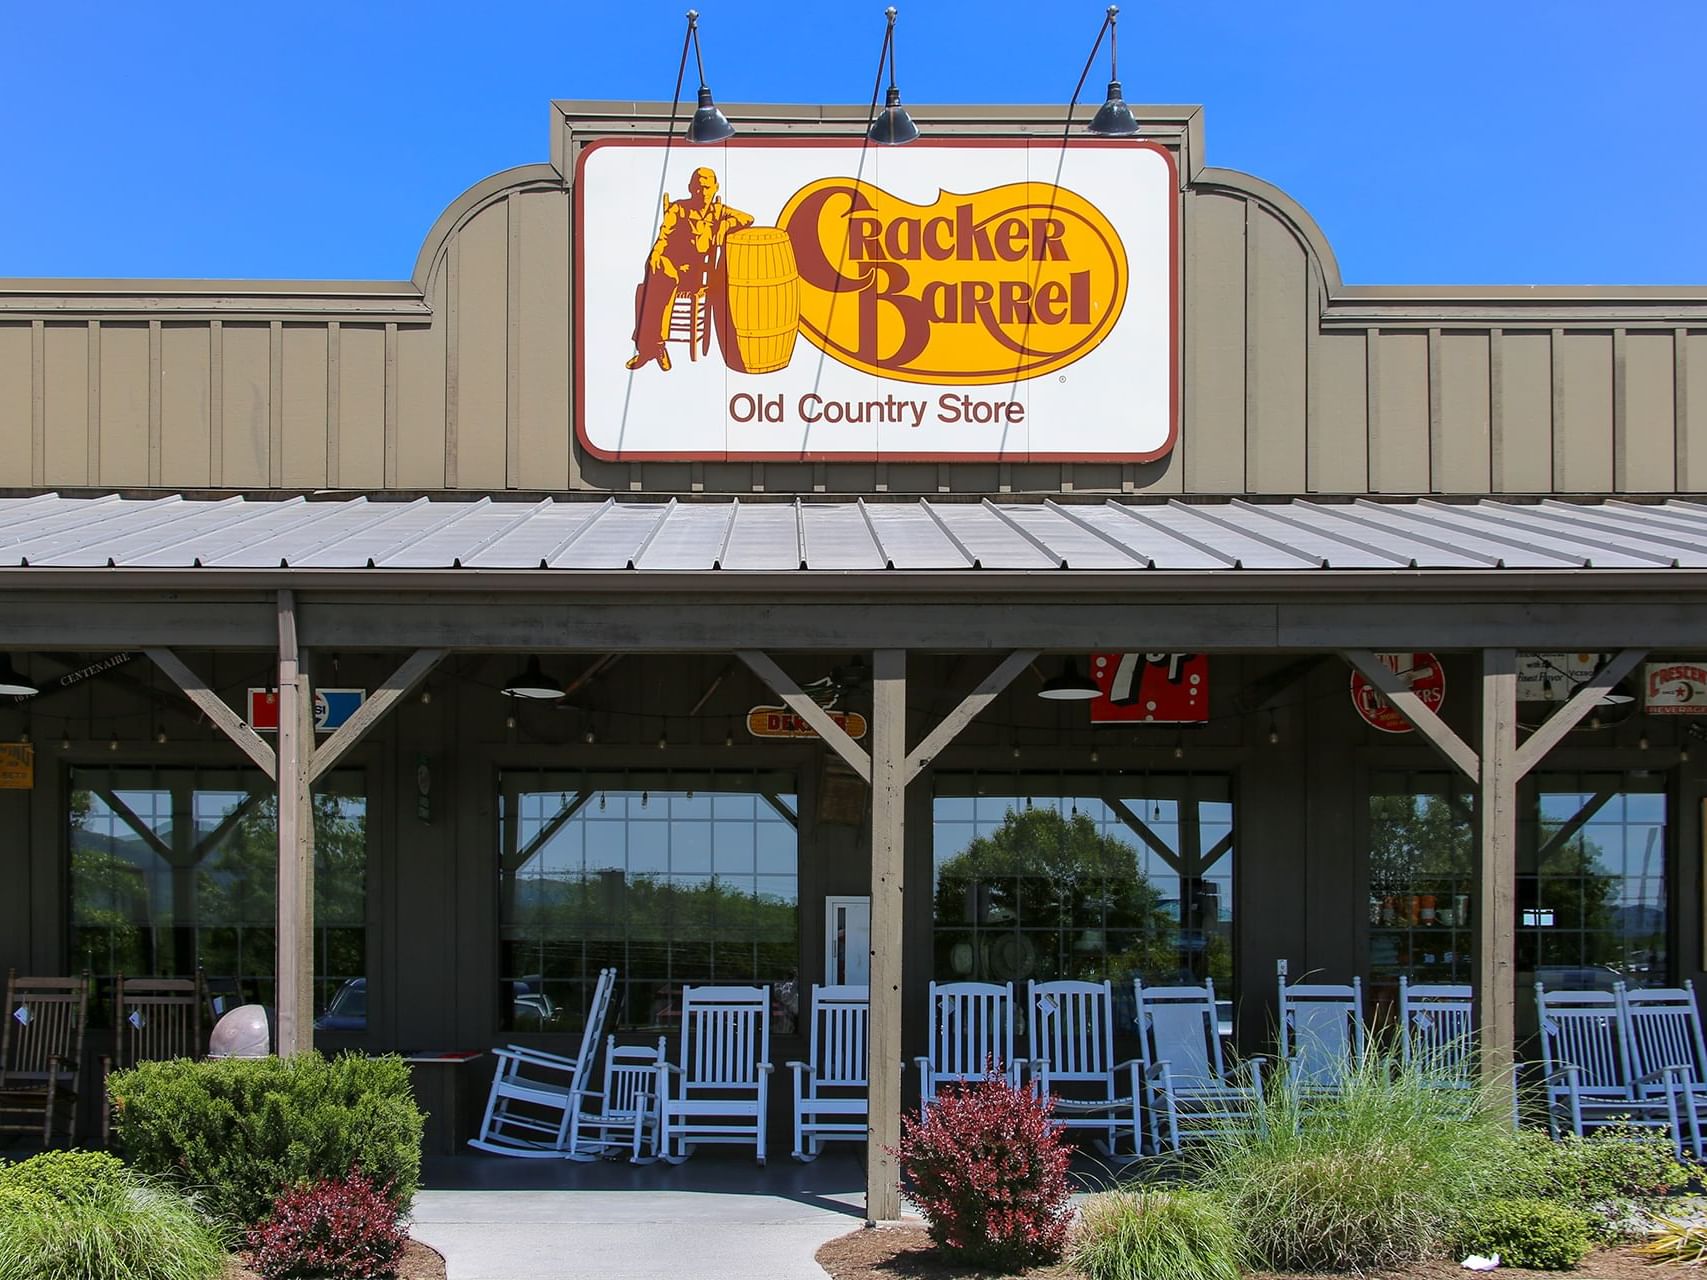 Cracker Barrel Old Country Store in Pigeon Forge, TN